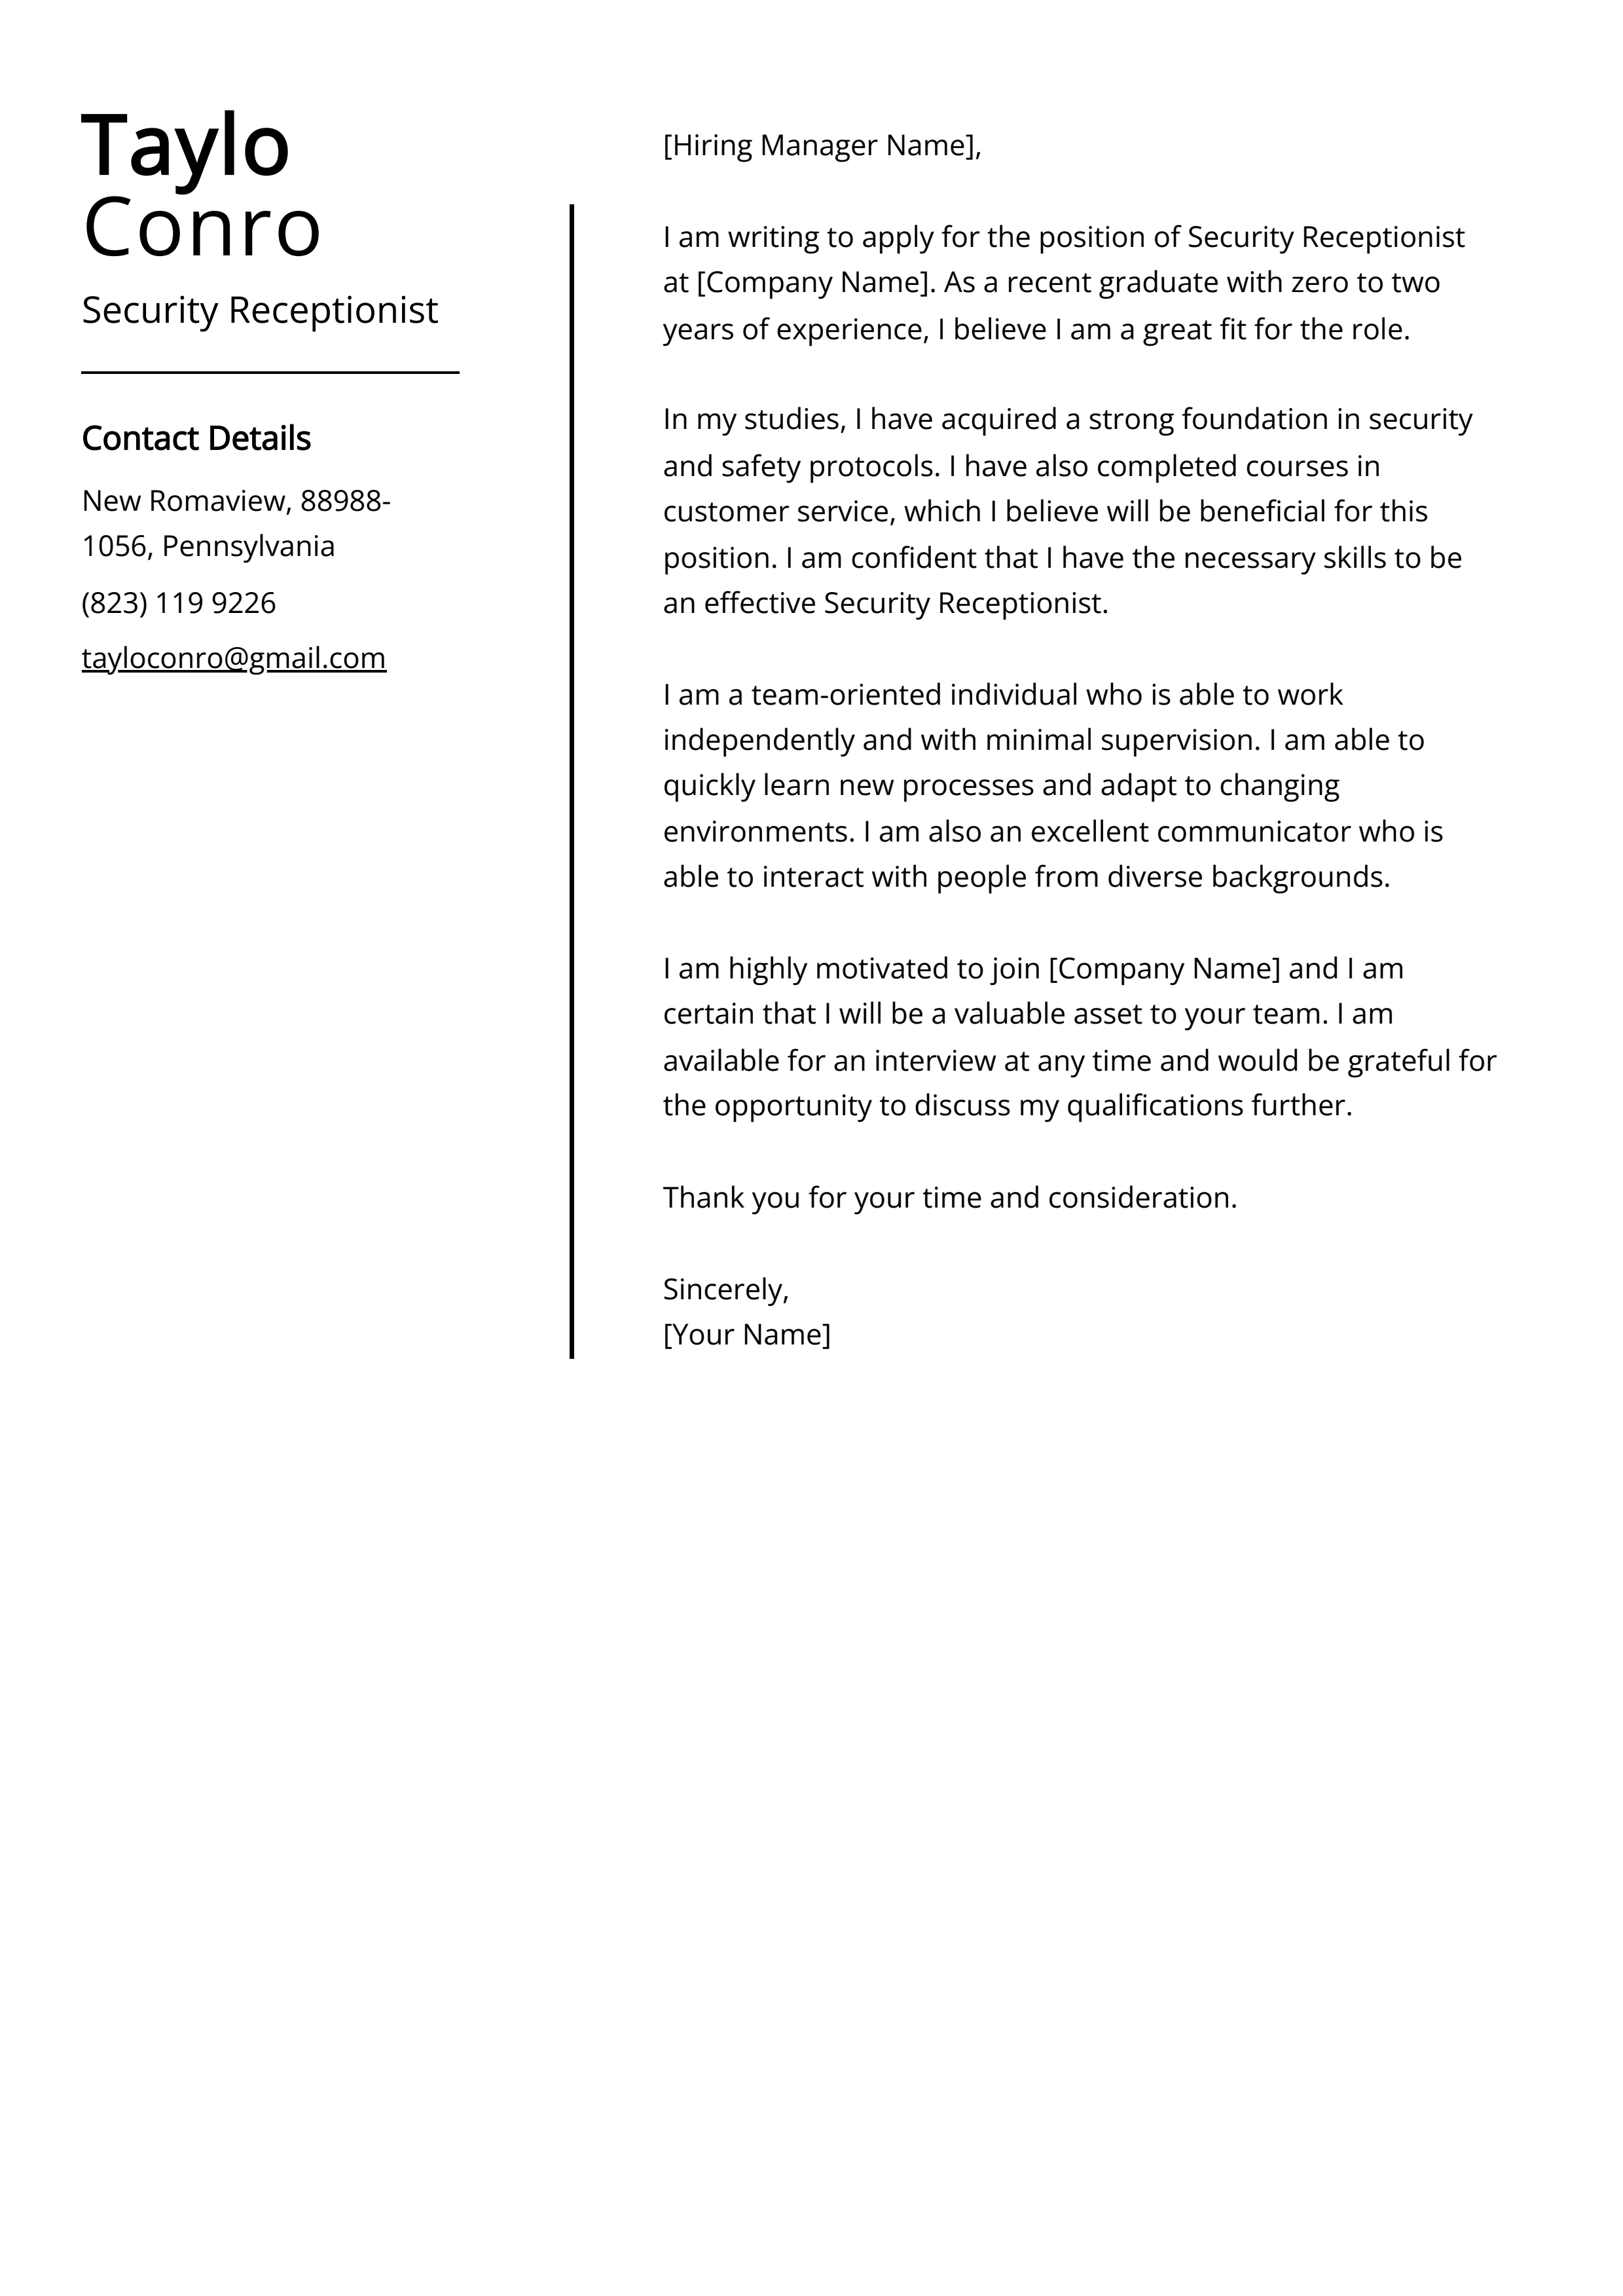 Security Receptionist Cover Letter Example